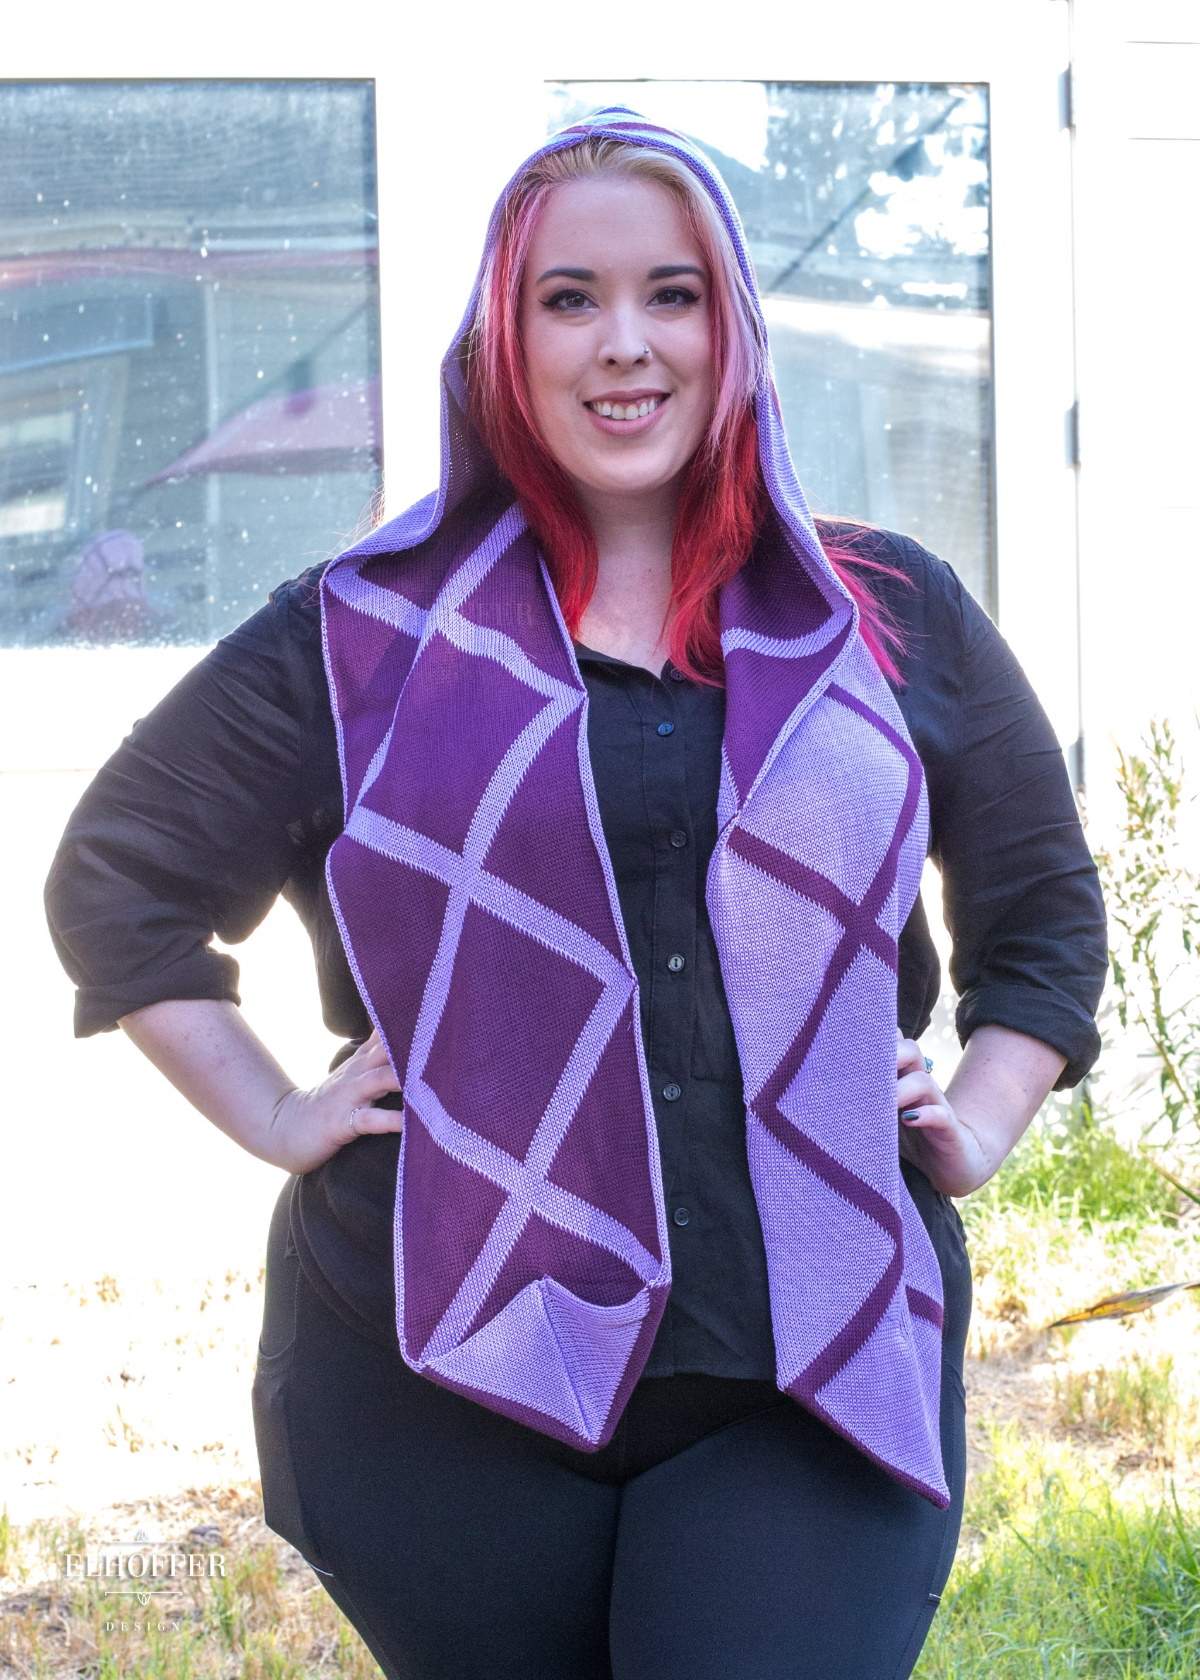 Star Wars Queen Amidala Inspired Galactic Queen Hooded Scarf by Elhoffer Design